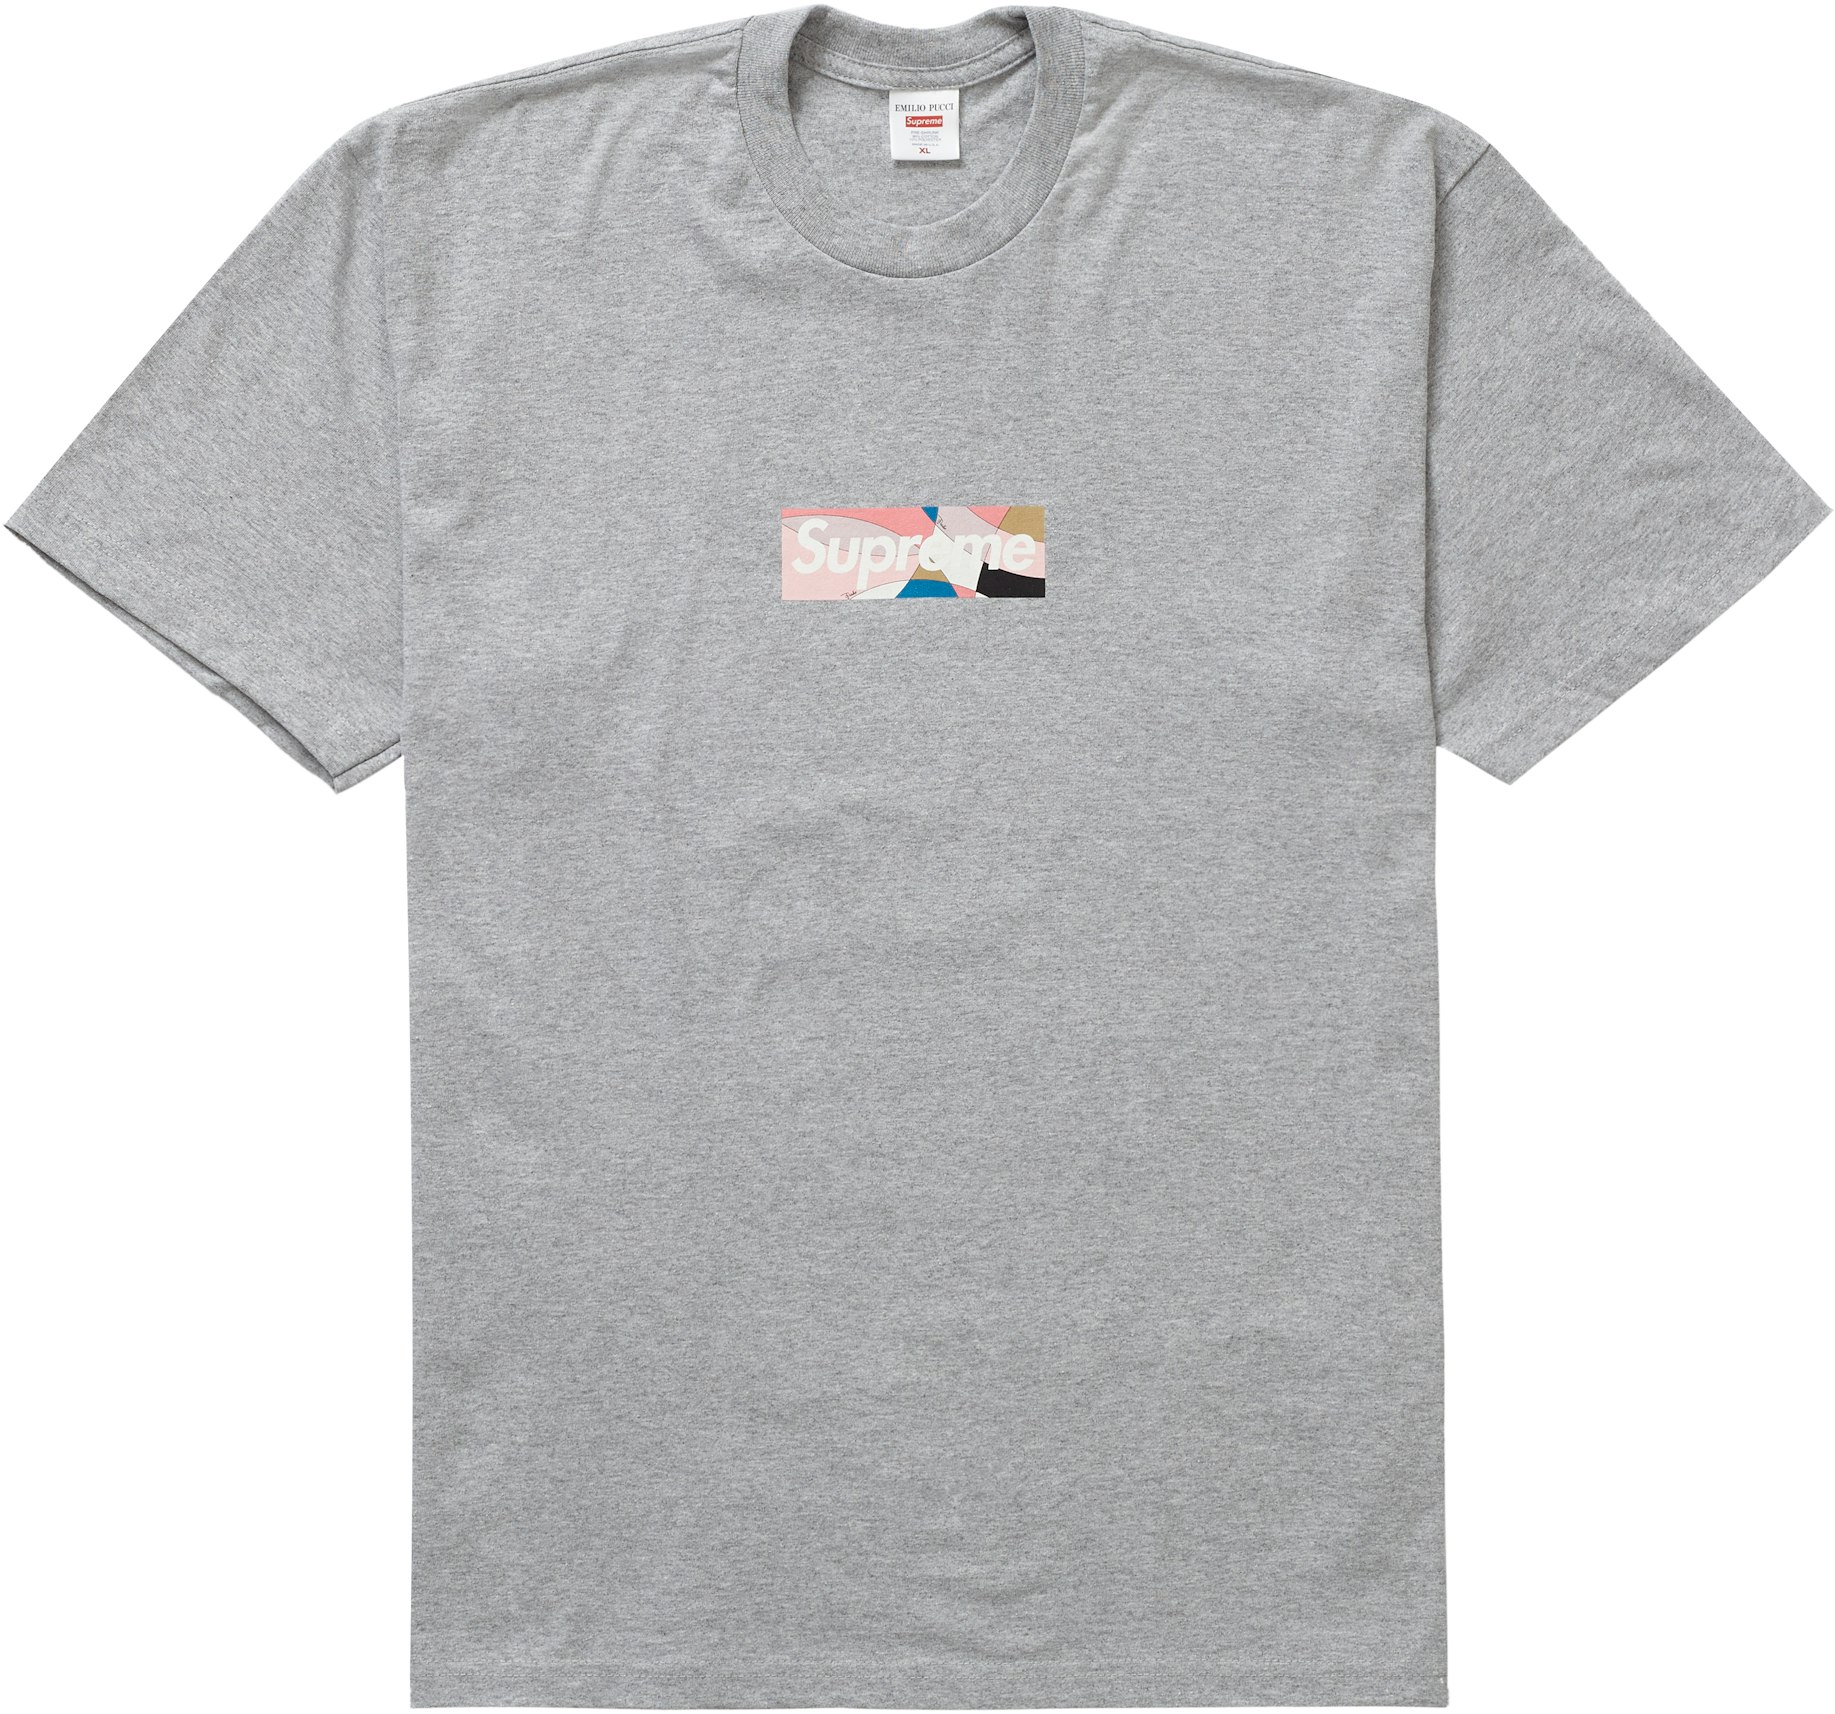 tre Nedgang dækning Supreme Emilio Pucci Box Logo Tee Heather Grey/Dusty Pink - SS21 Men's - US